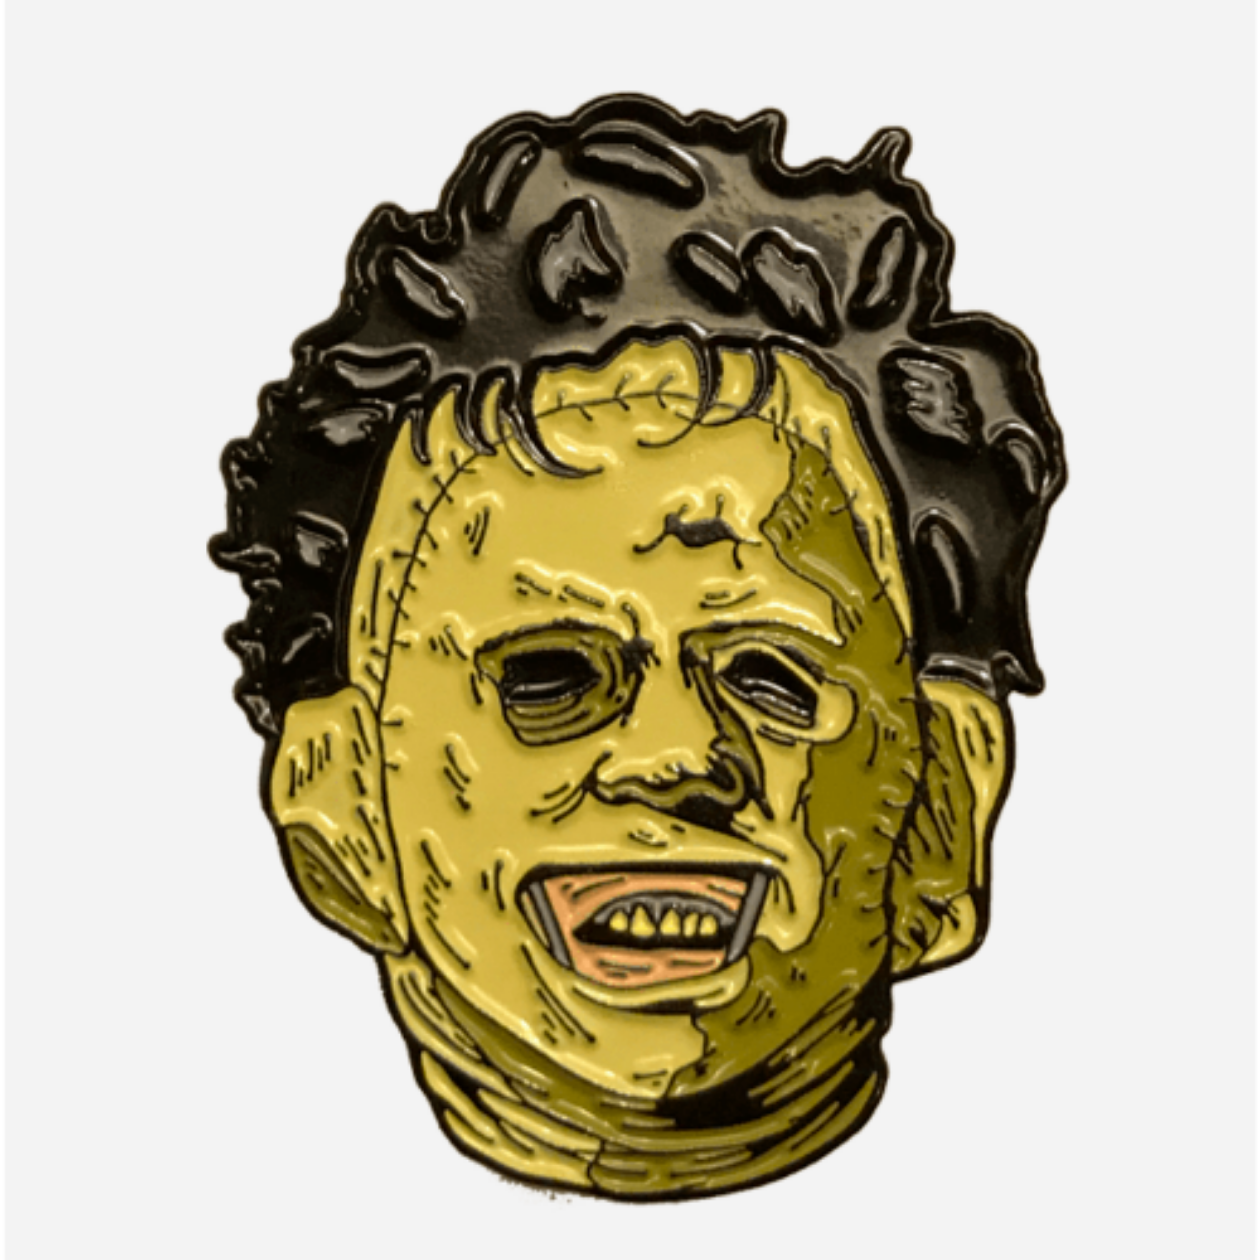 The Texas Chainsaw Massacre Leatherface Collectible Enamel Pin